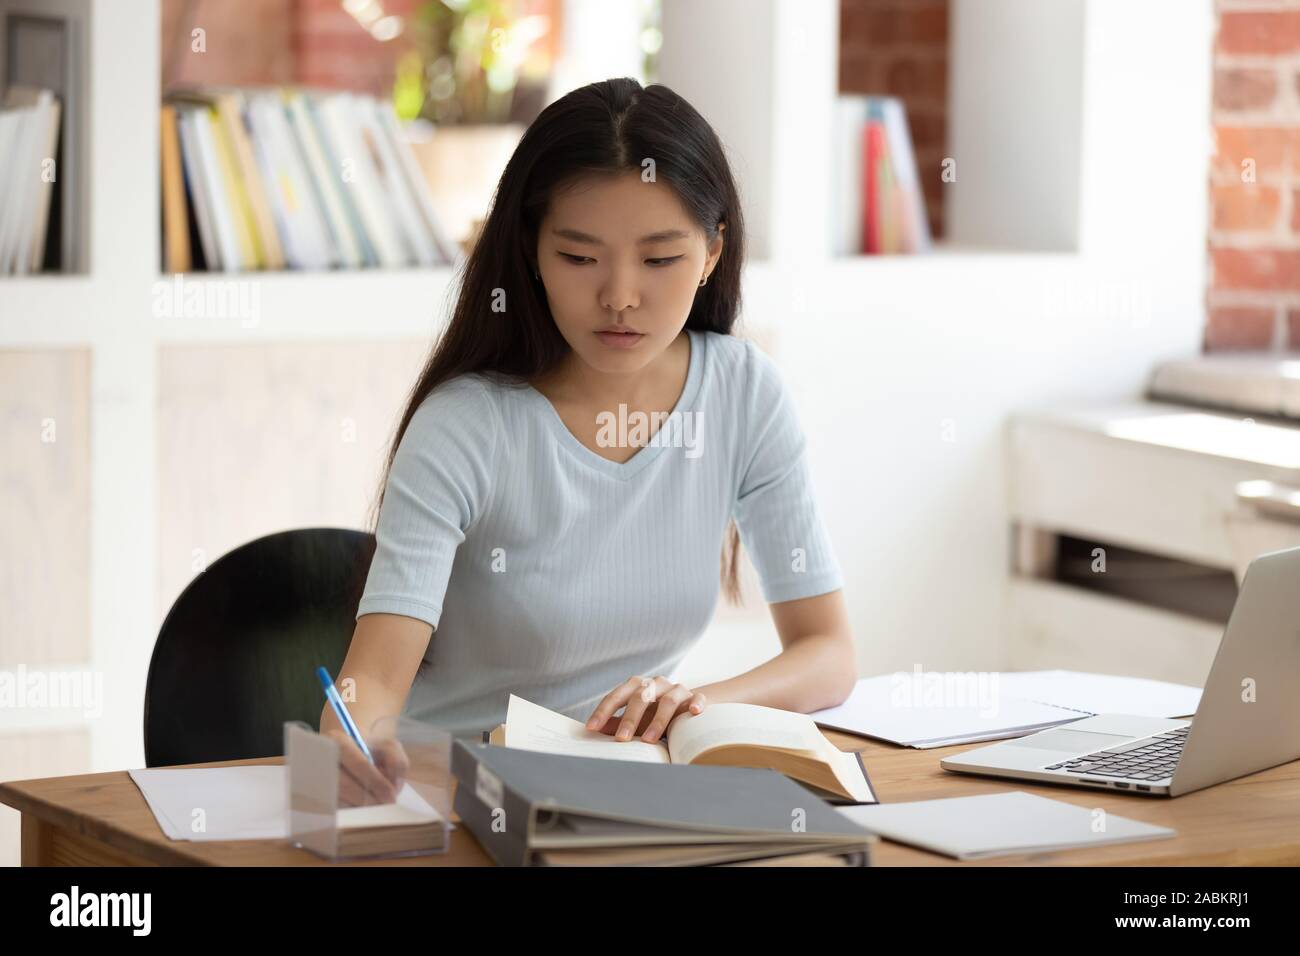 Concentrated young Asian female student sitting at desk in library. Stock Photo